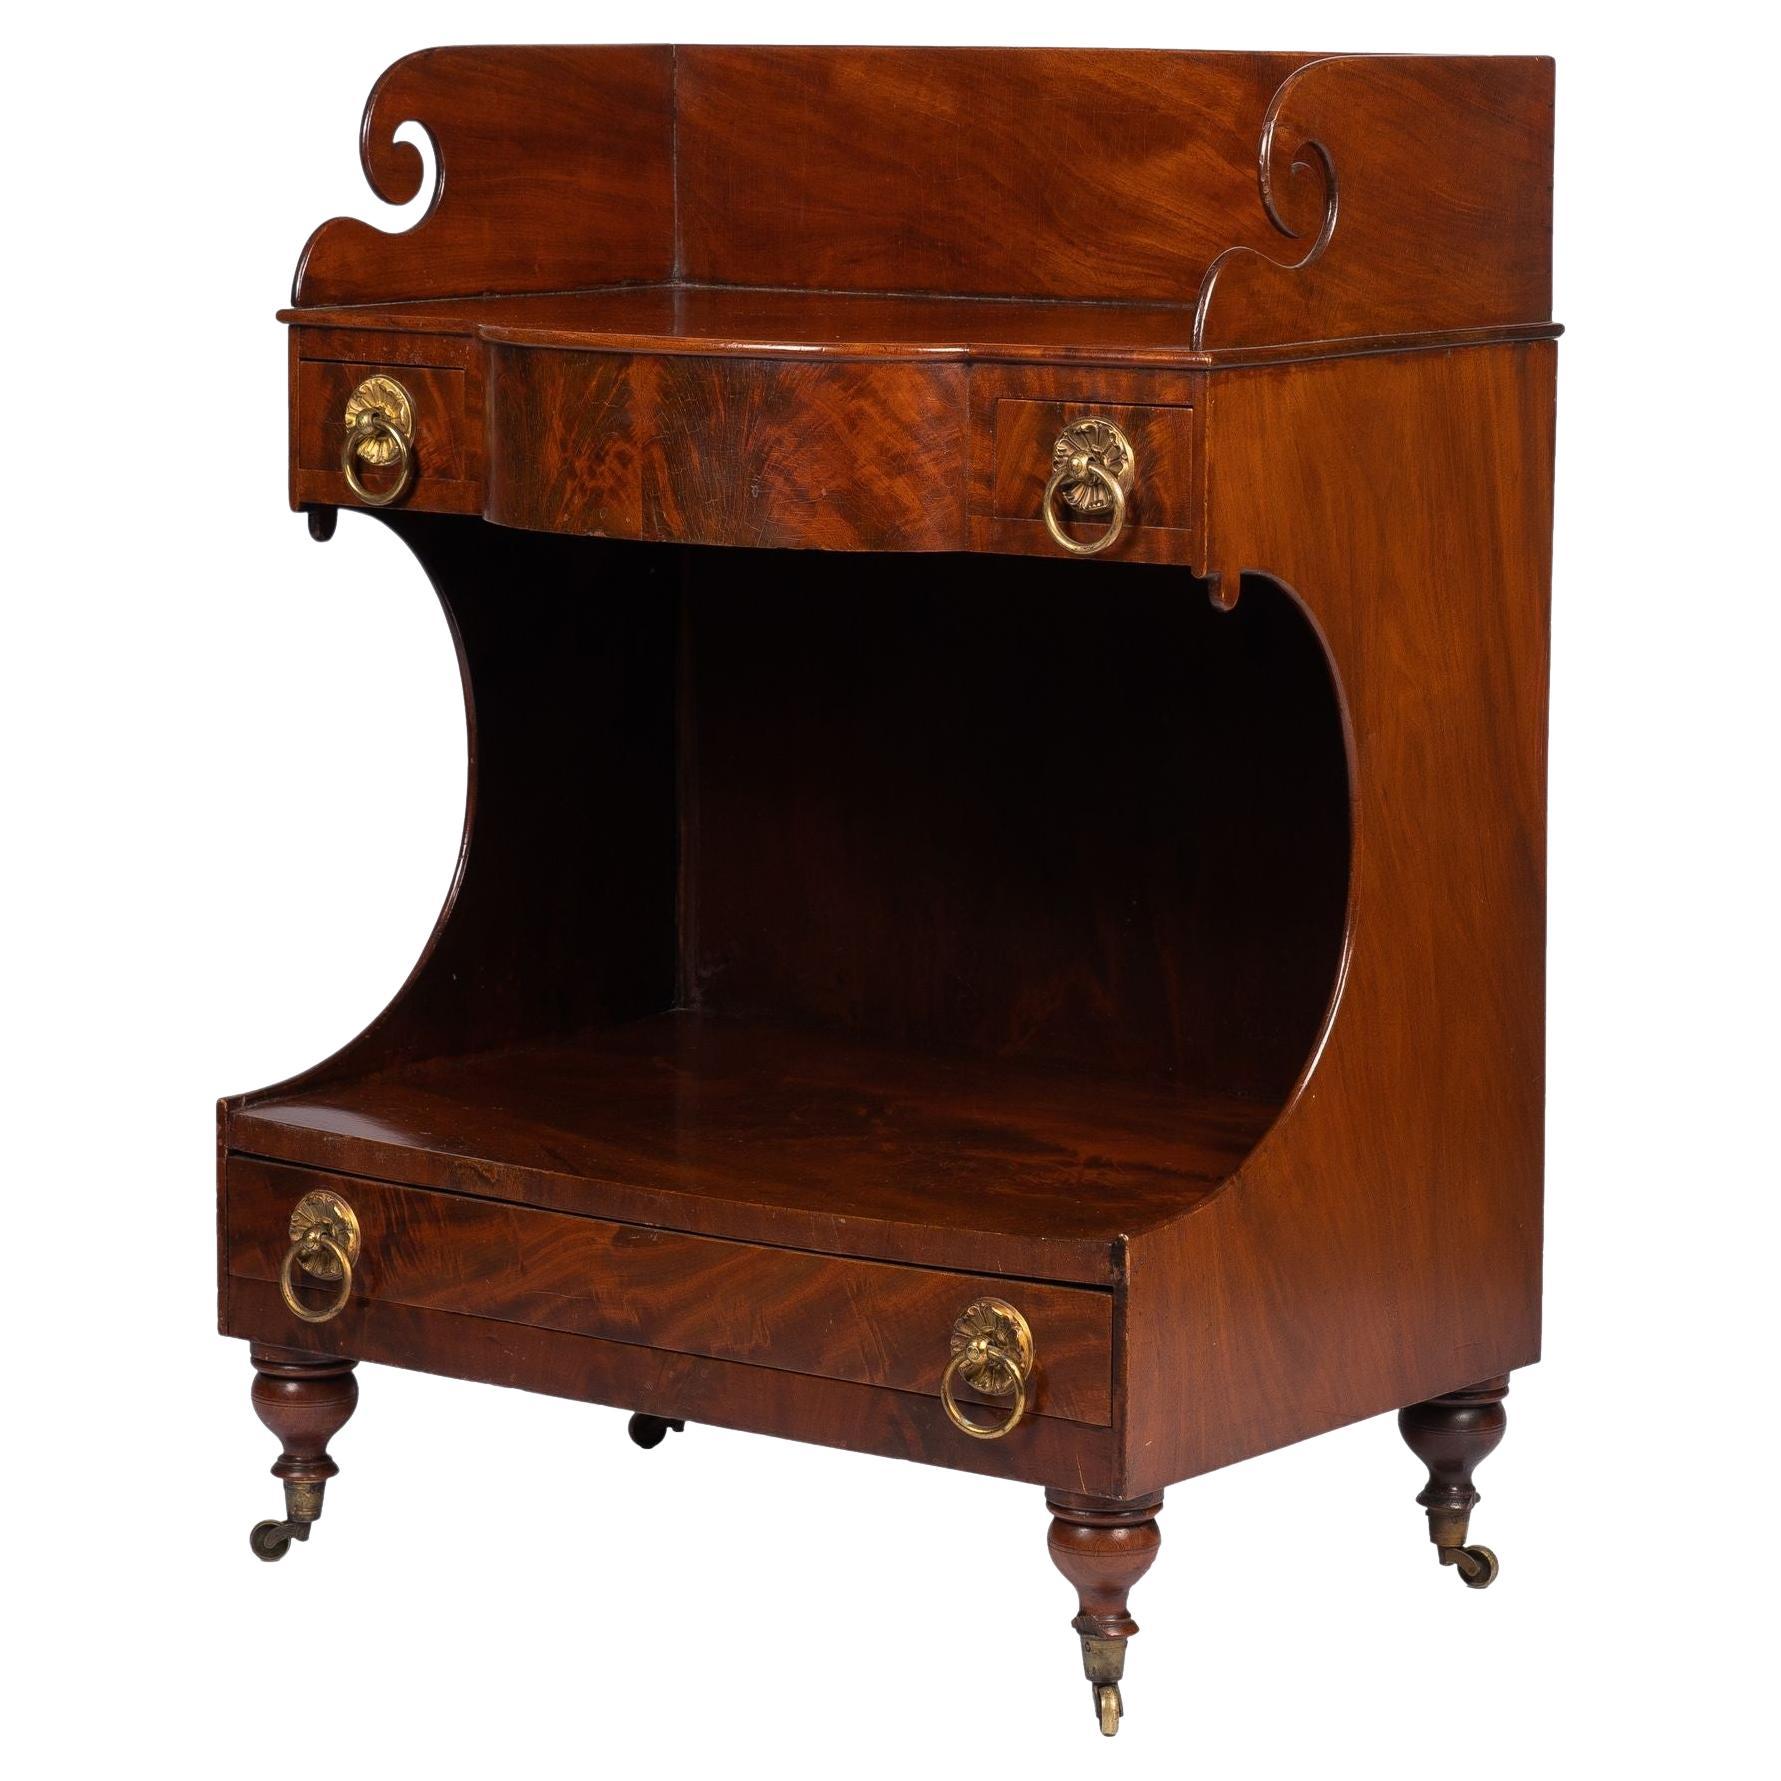 American Mahogany Demilune Dressing Stand on Brass Castors, 1830